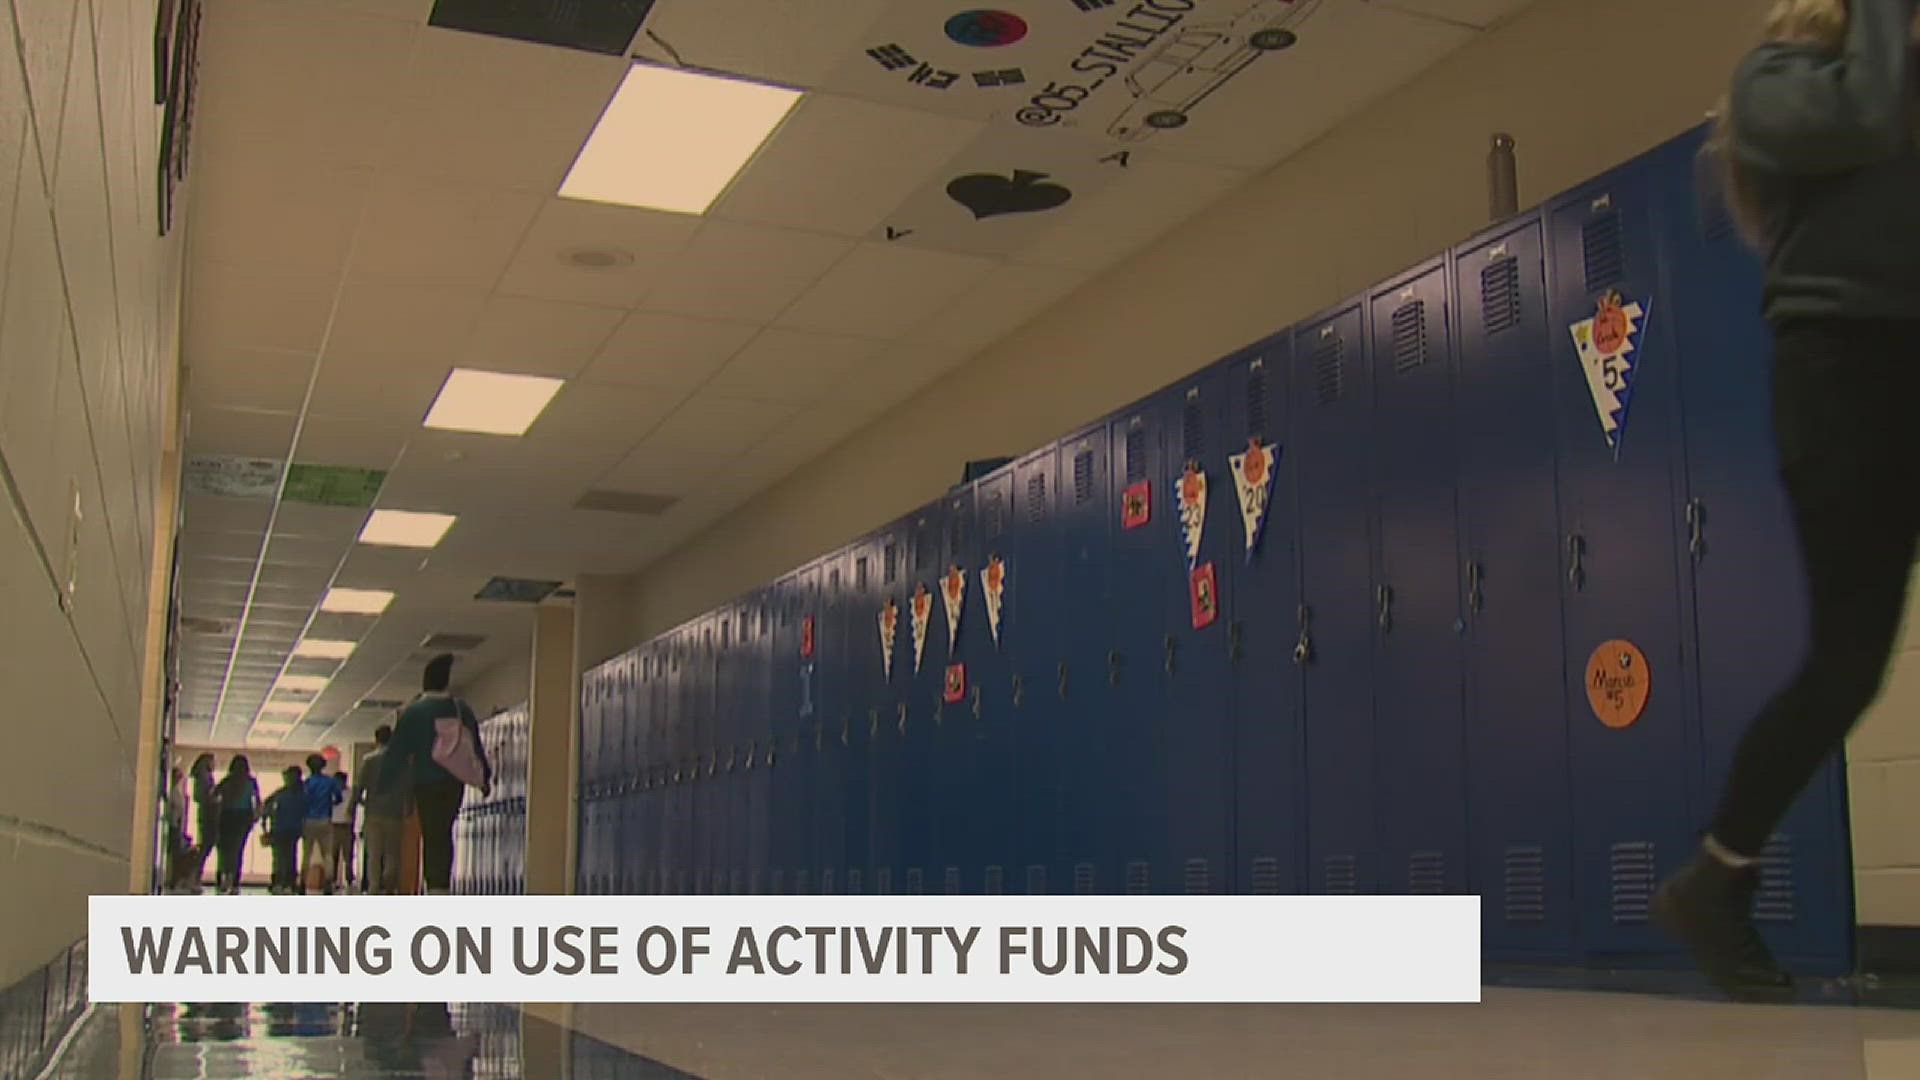 The warning follows an investigation of 15 districts found that nearly $270,000 collected by student-related activities was misused in the last ten years.